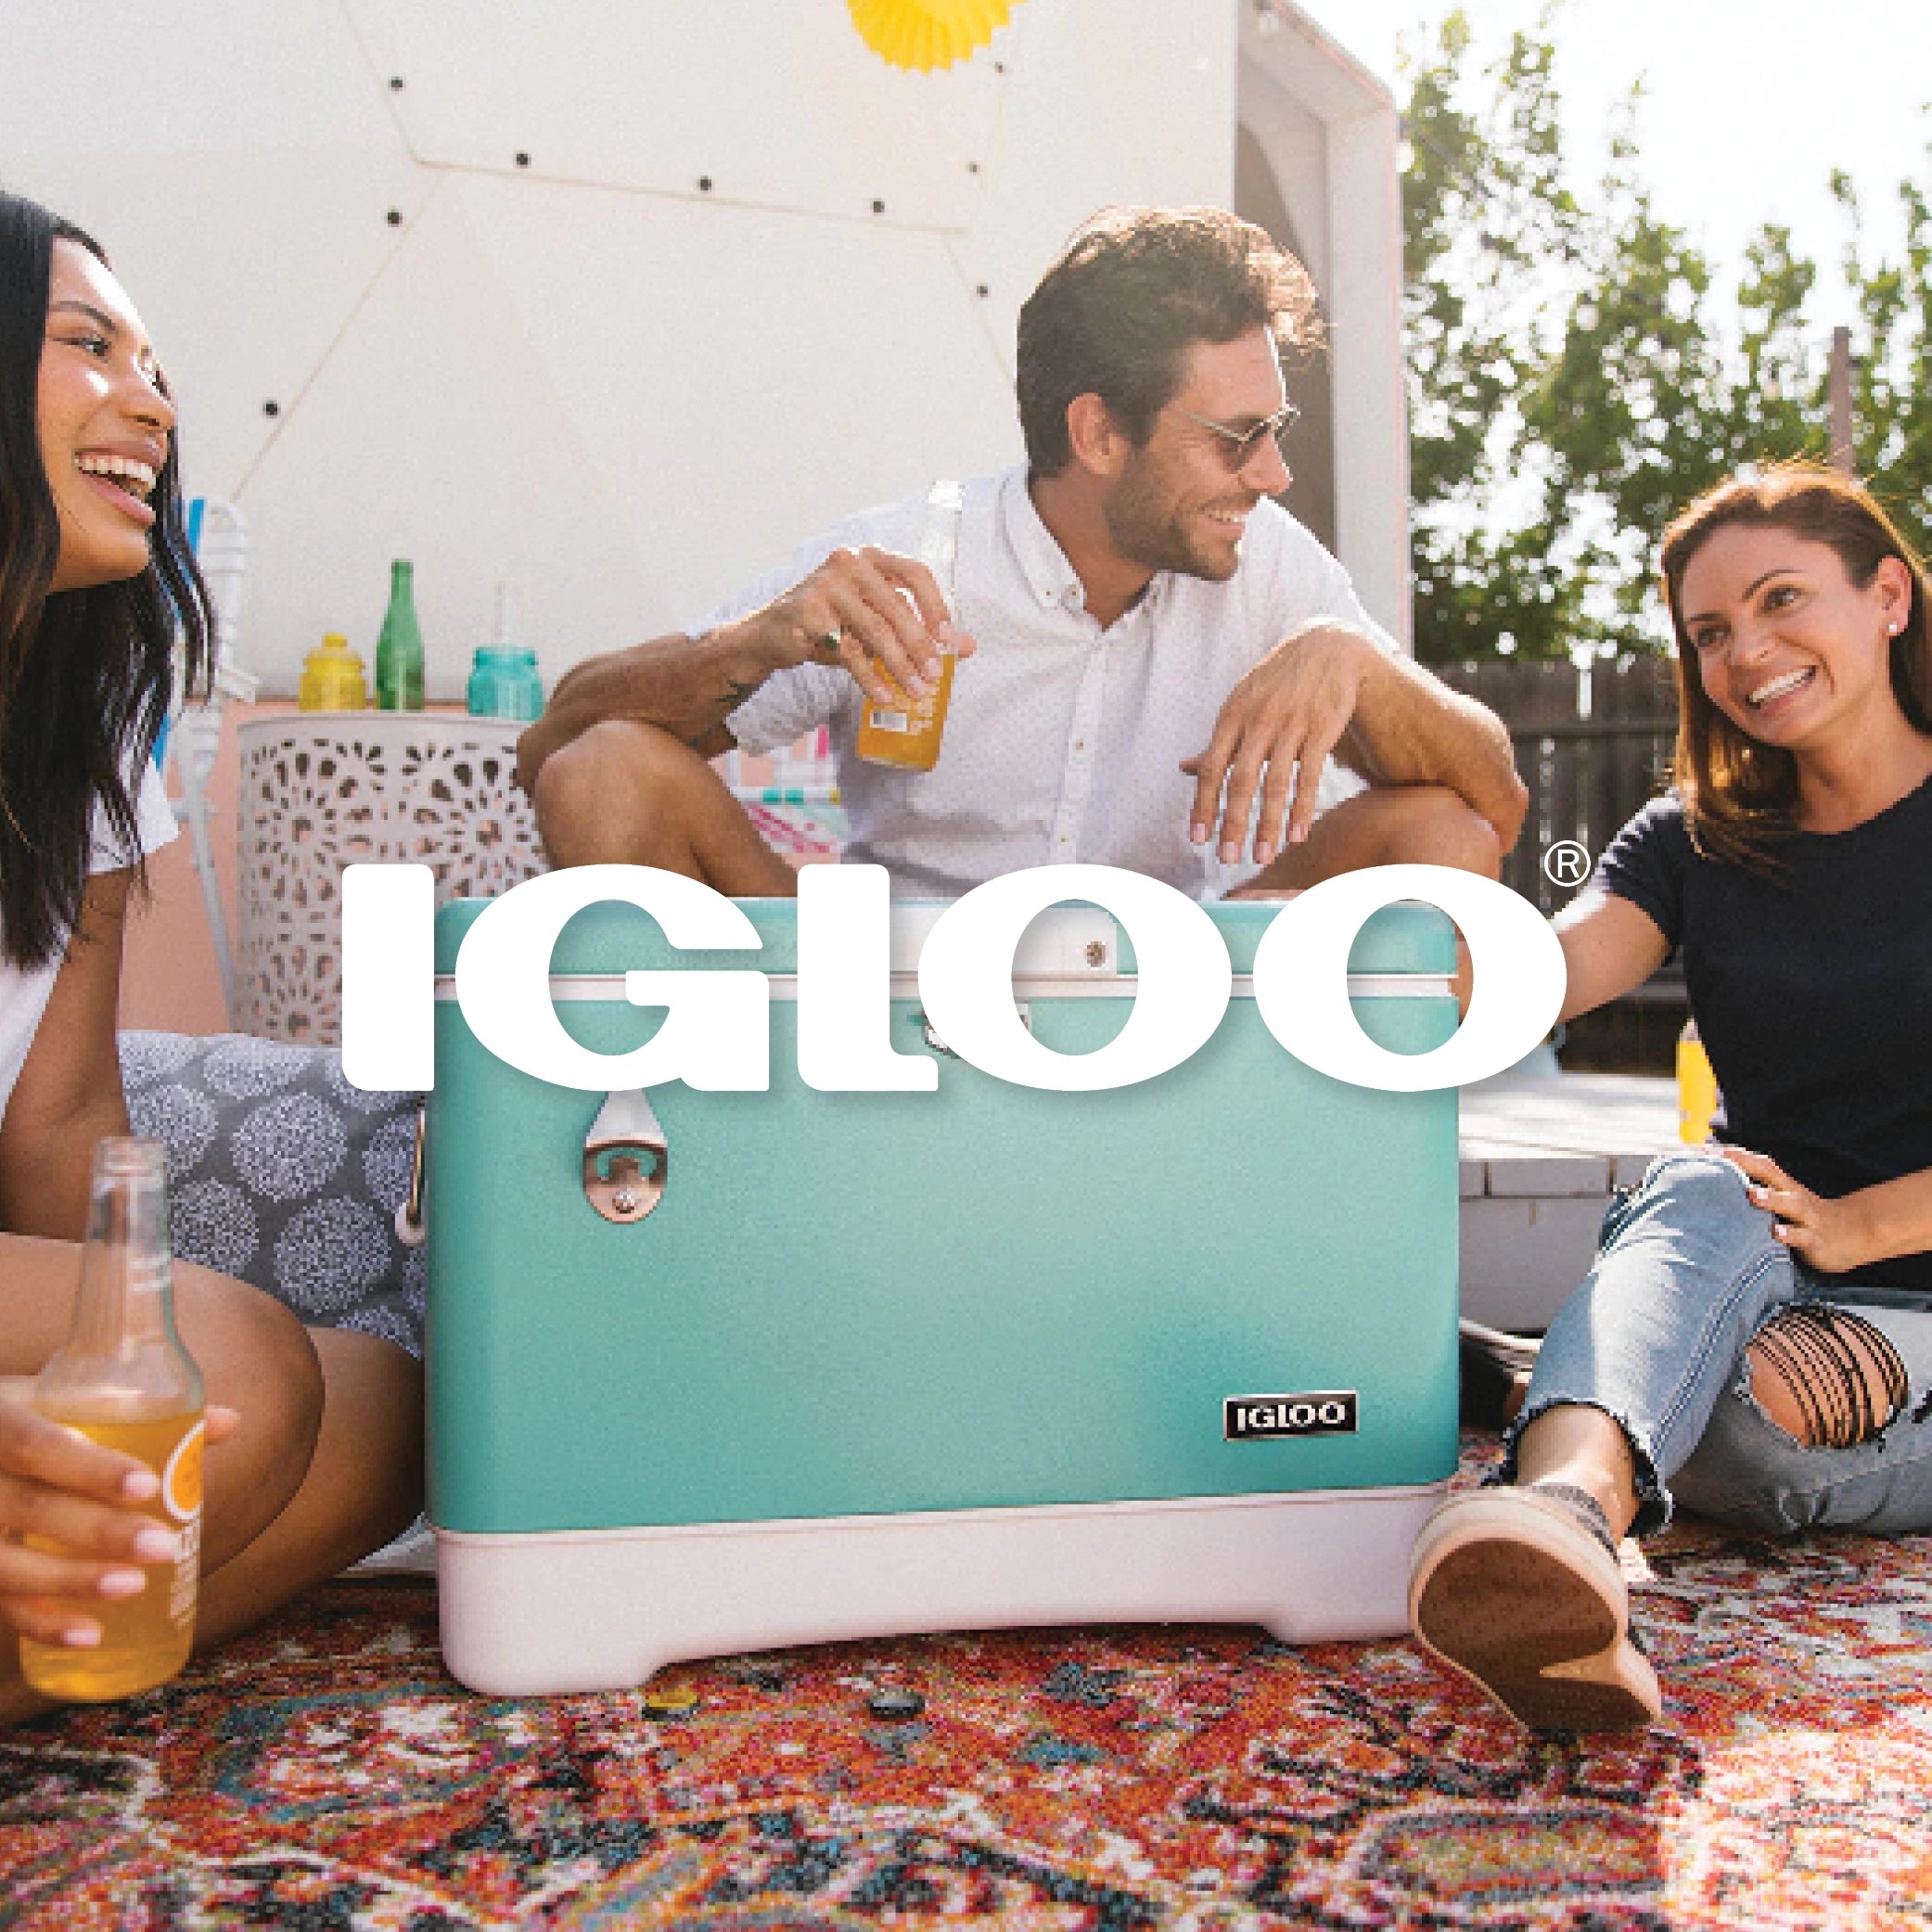 Friends sitting on ground at party with Igloo Legacy Stainless Steel Cooler